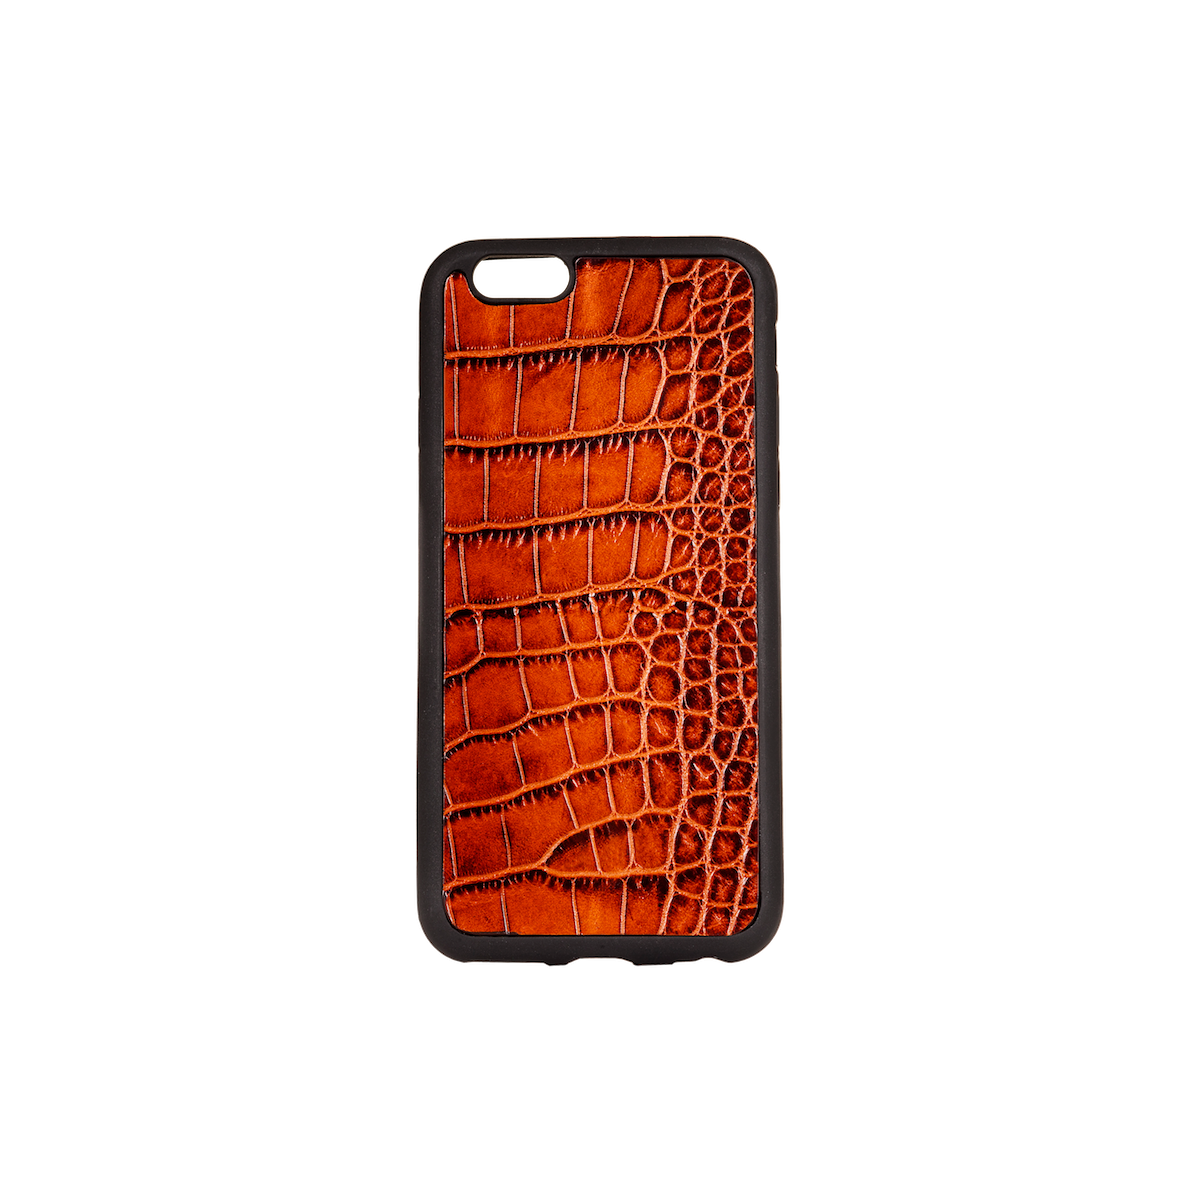 Iphone 6 Case, Tan Croco Leather, MAISON JMK-VONMEL Luxe Gifts